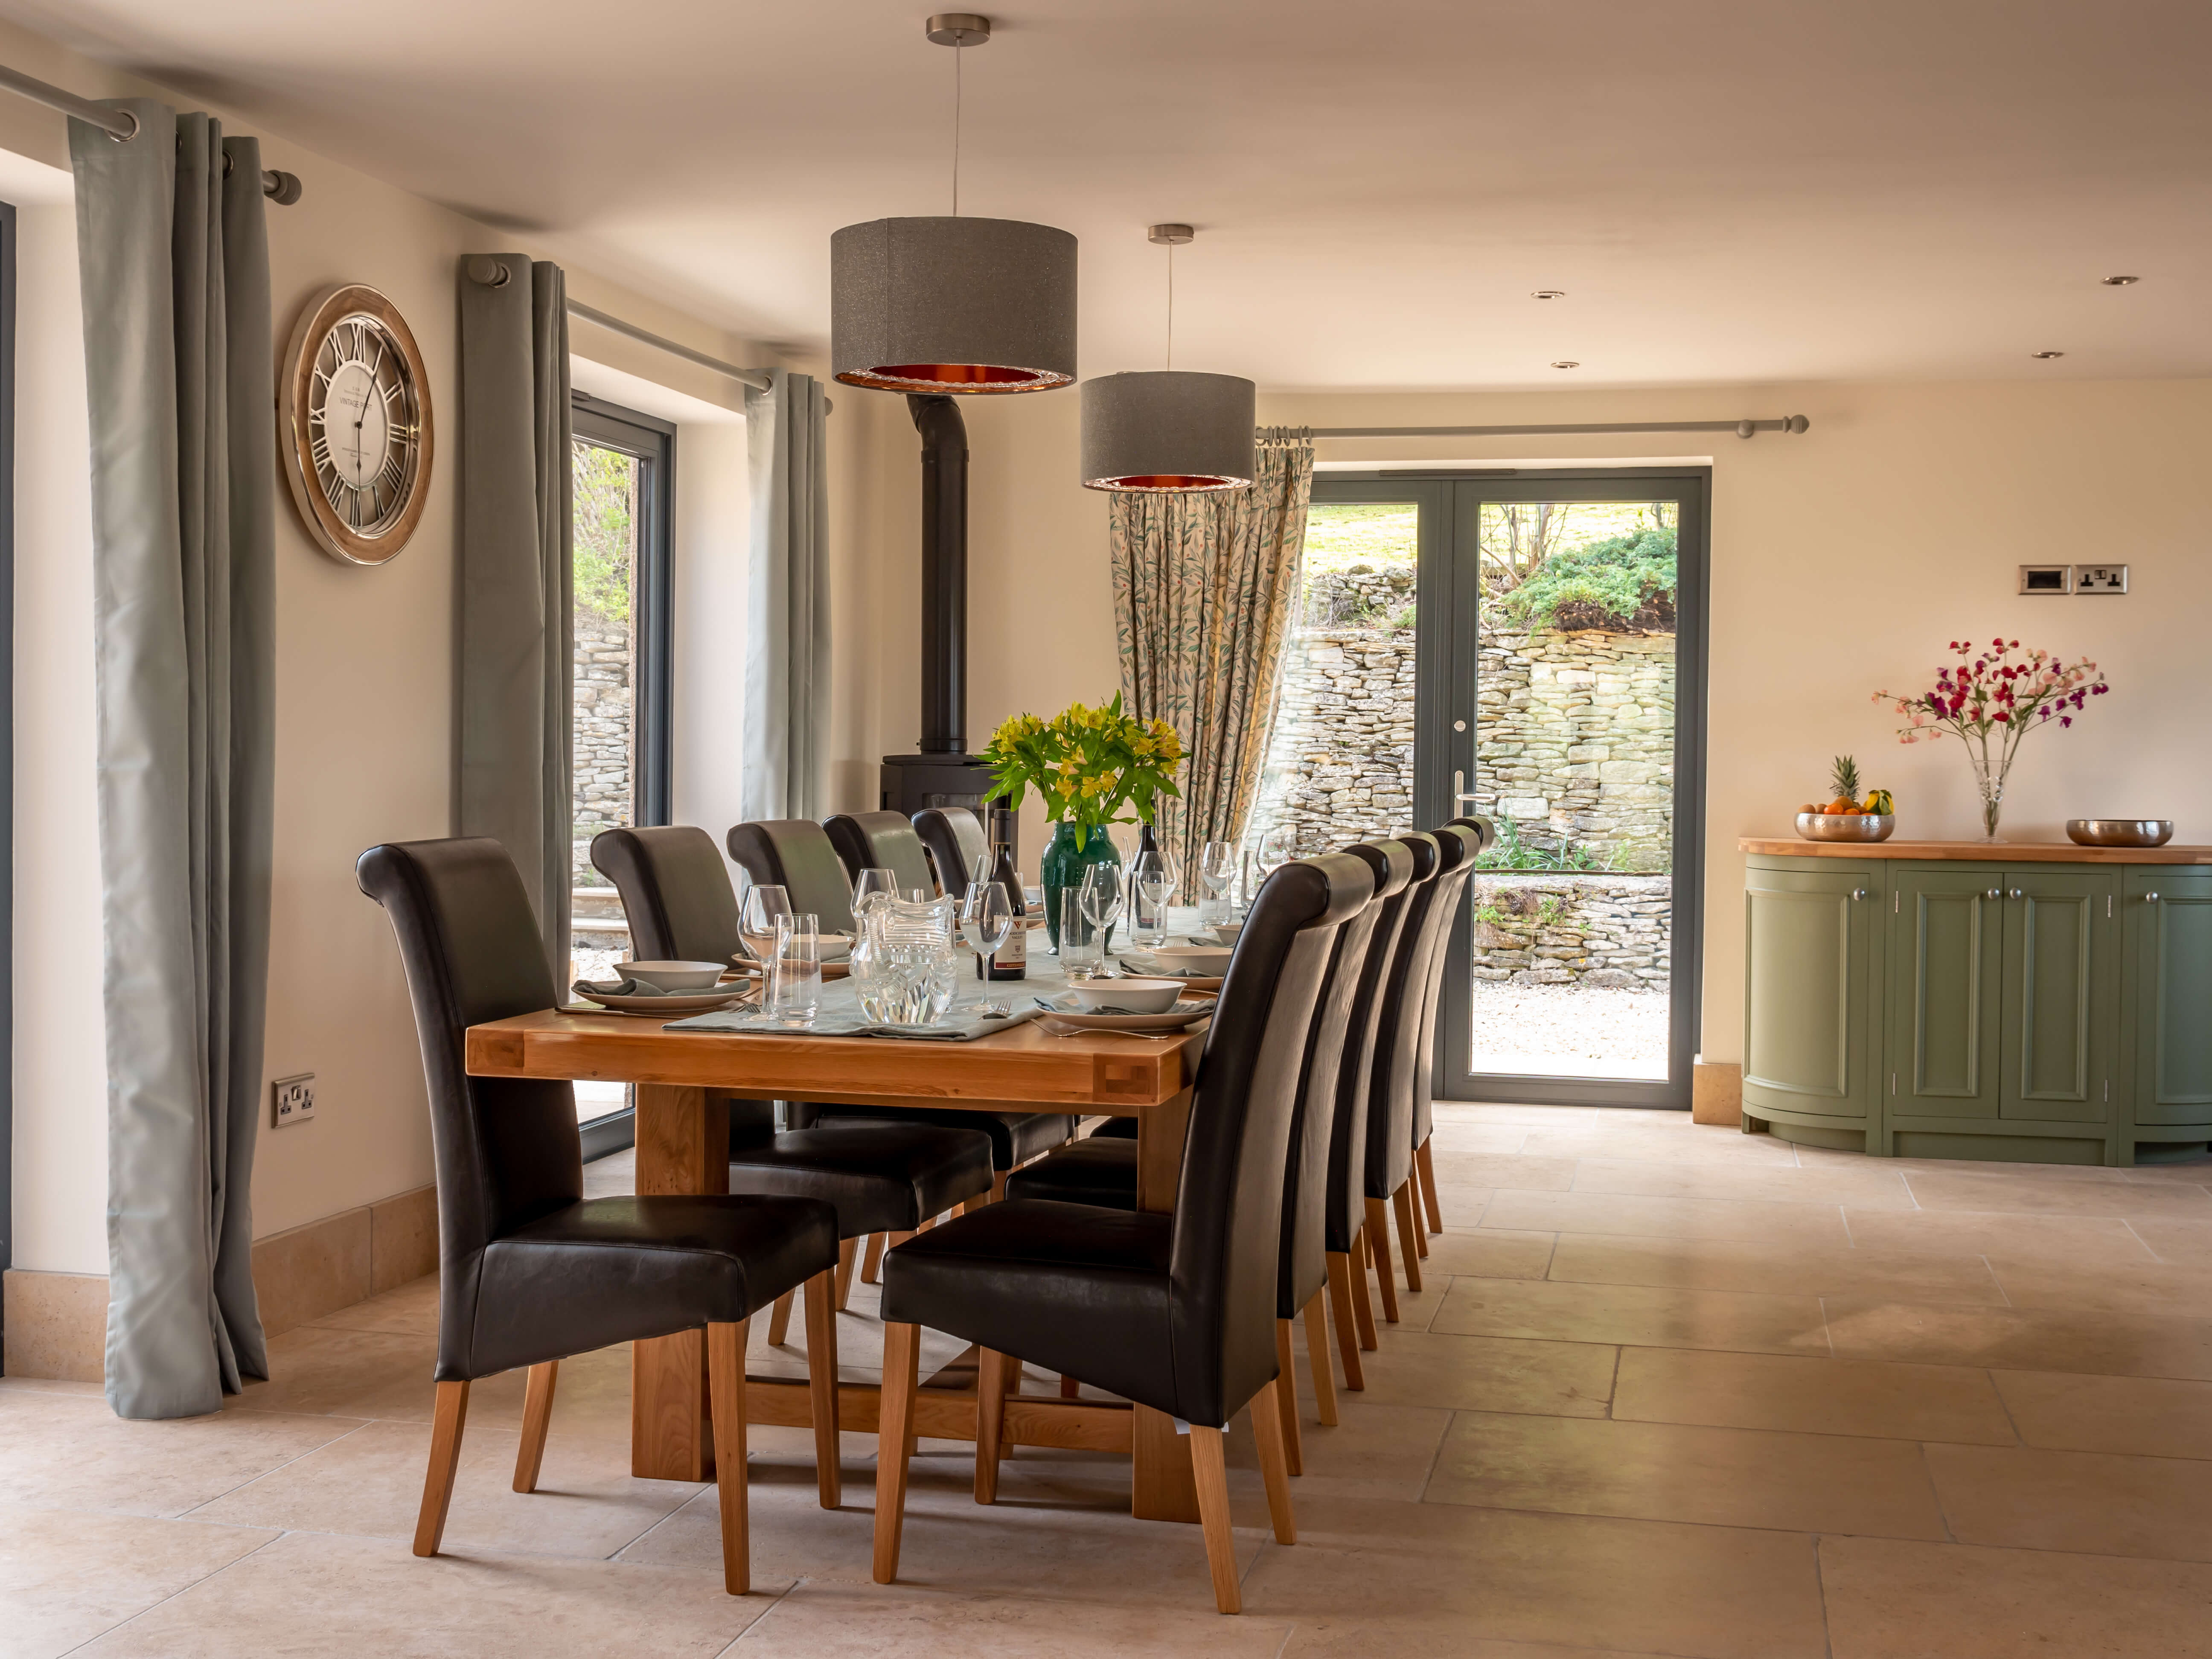 Woodchester Valley House - inside dining with French door access to the patio